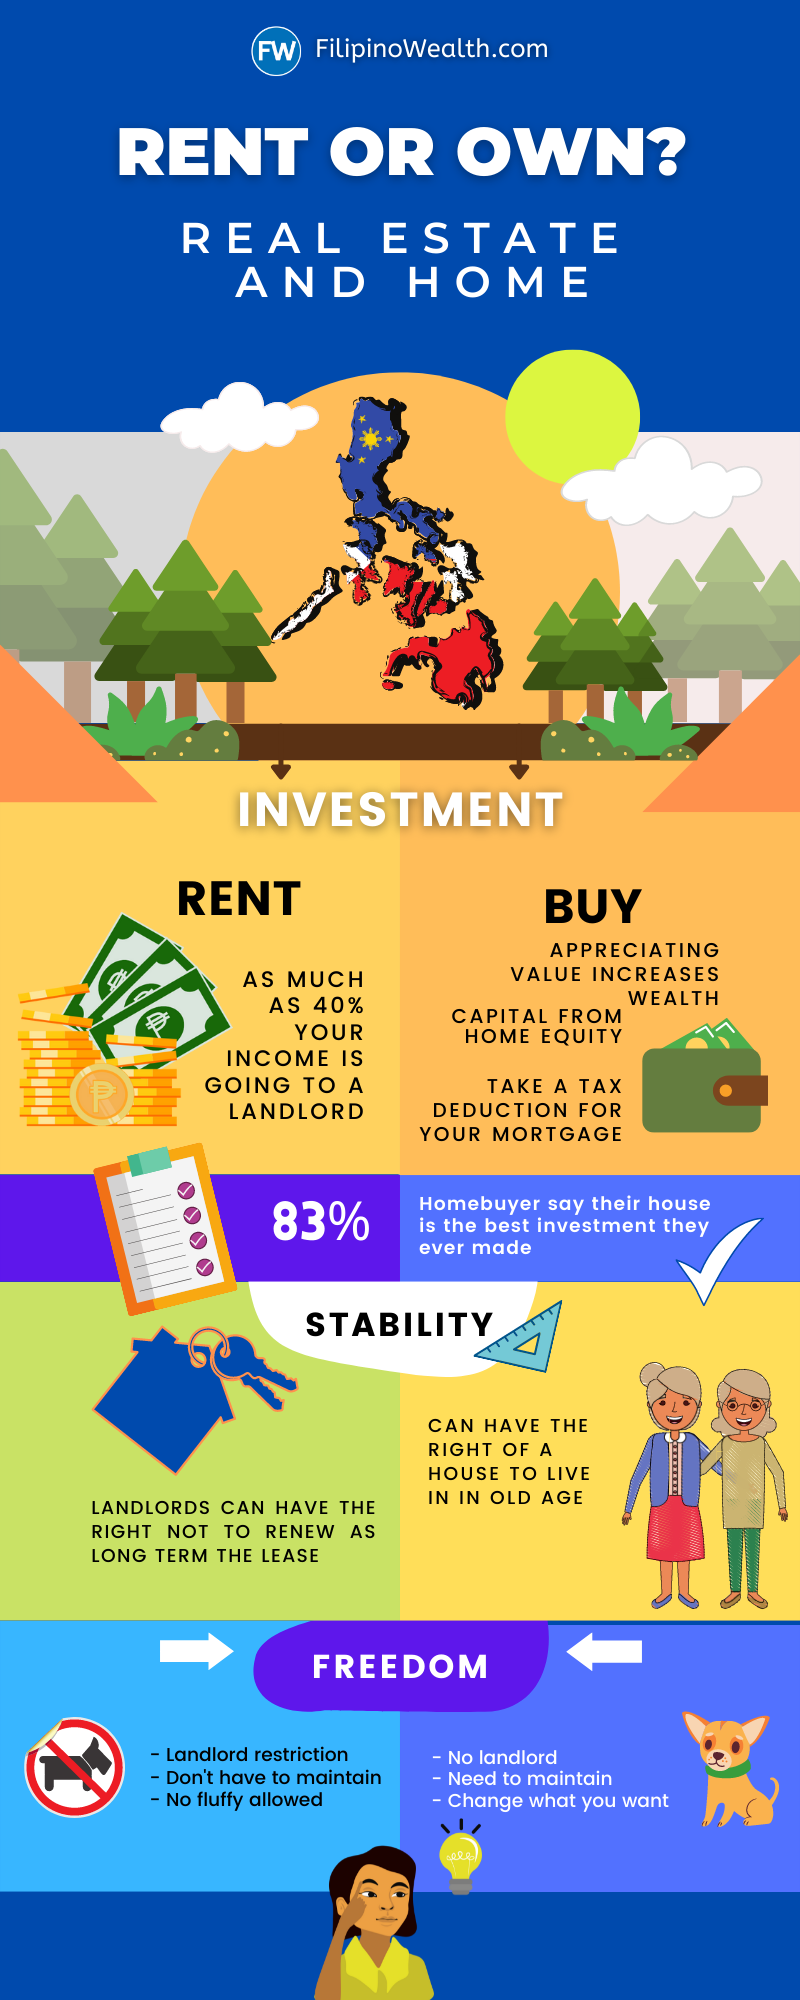 real estate investment plan philippines 